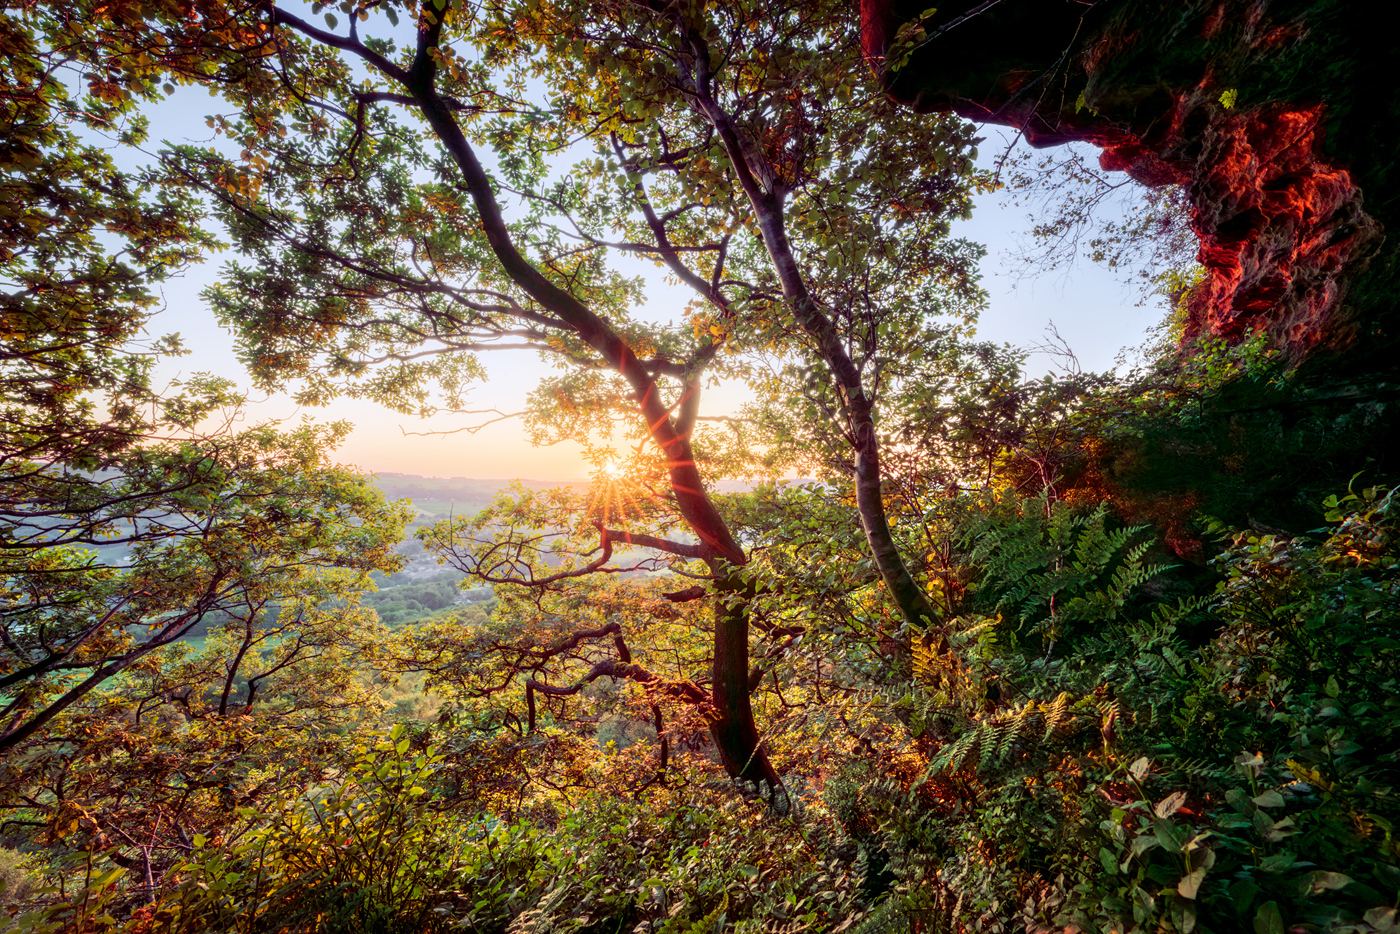 A serene sunrise peers through the dense foliage of North Yorkshire's woods. Lush green leaves dapple the warm glow as it blankets the landscape. The contours of distant hills silhouette against the soft sky on the horizon. The scene is a tranquil intersection of day's beginning and nature's quiet.